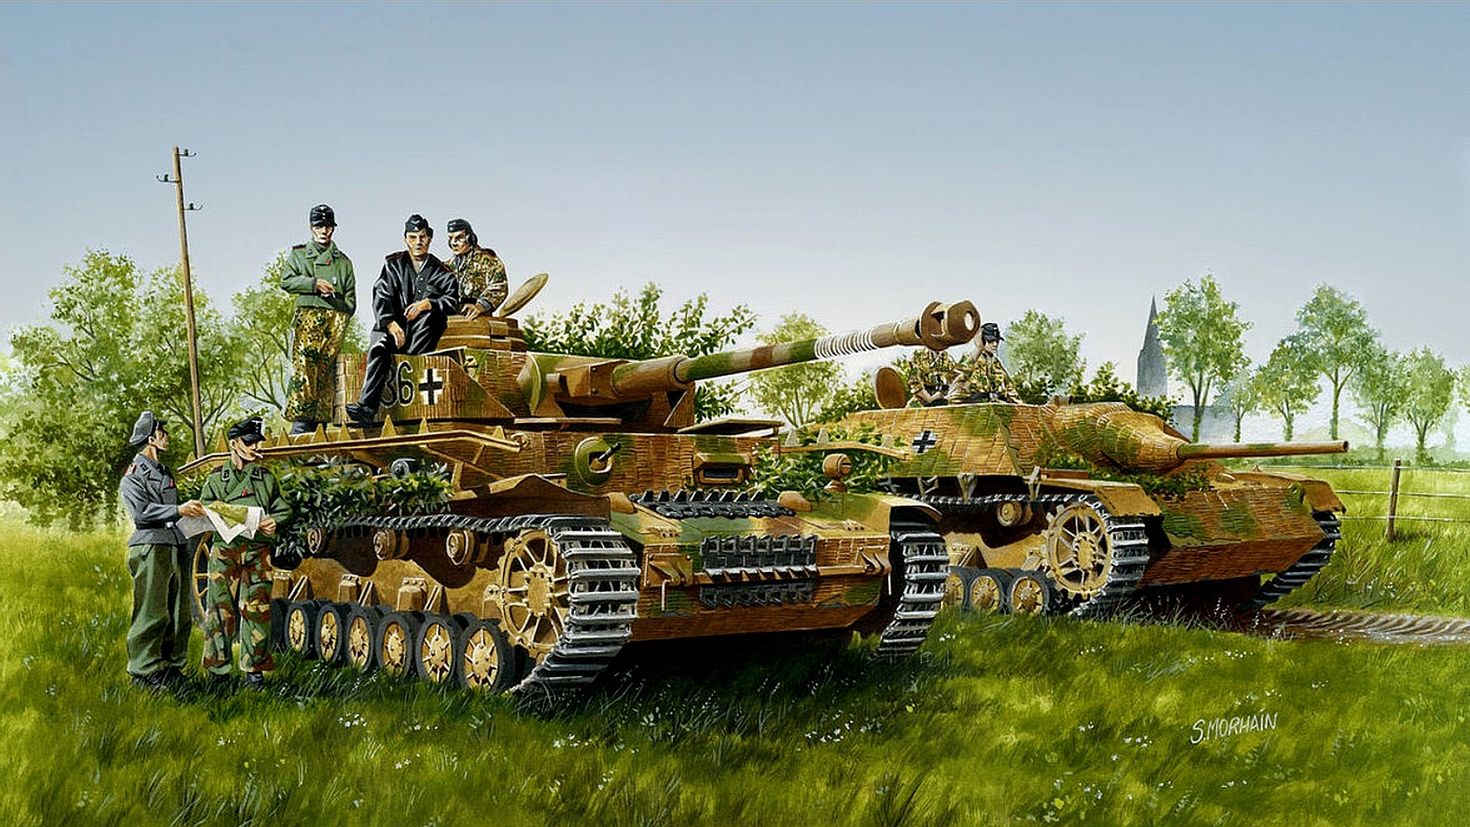 Ss tanks. Танки вермахта тигр. Панзер 2 арт. Panzer 3 ww2. 00401 Trumpeter 1/35 12th Panzer Division (Normandy 1944).